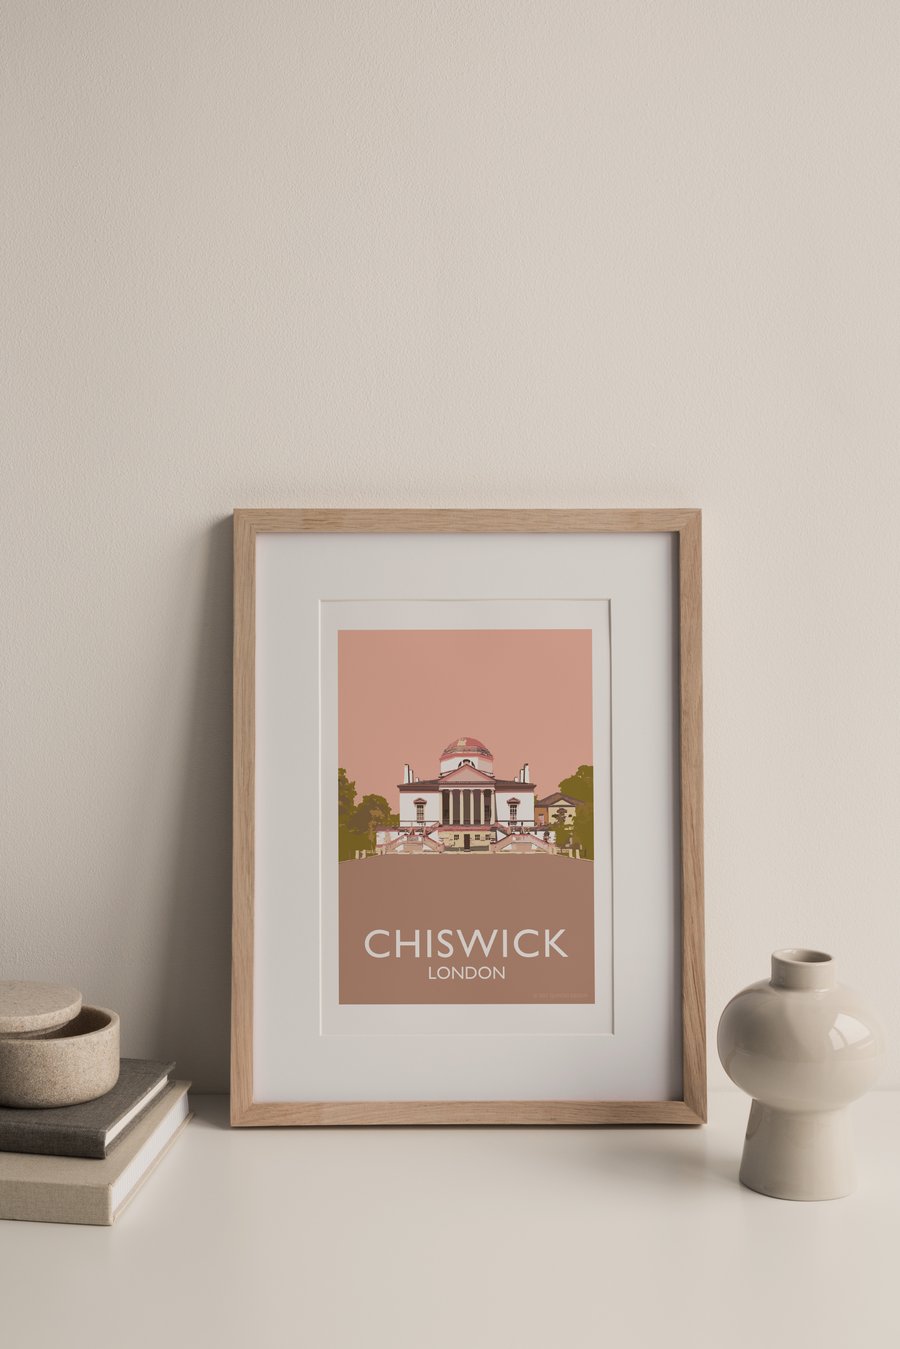 Chiswick, London W4 Giclee Travel Poster